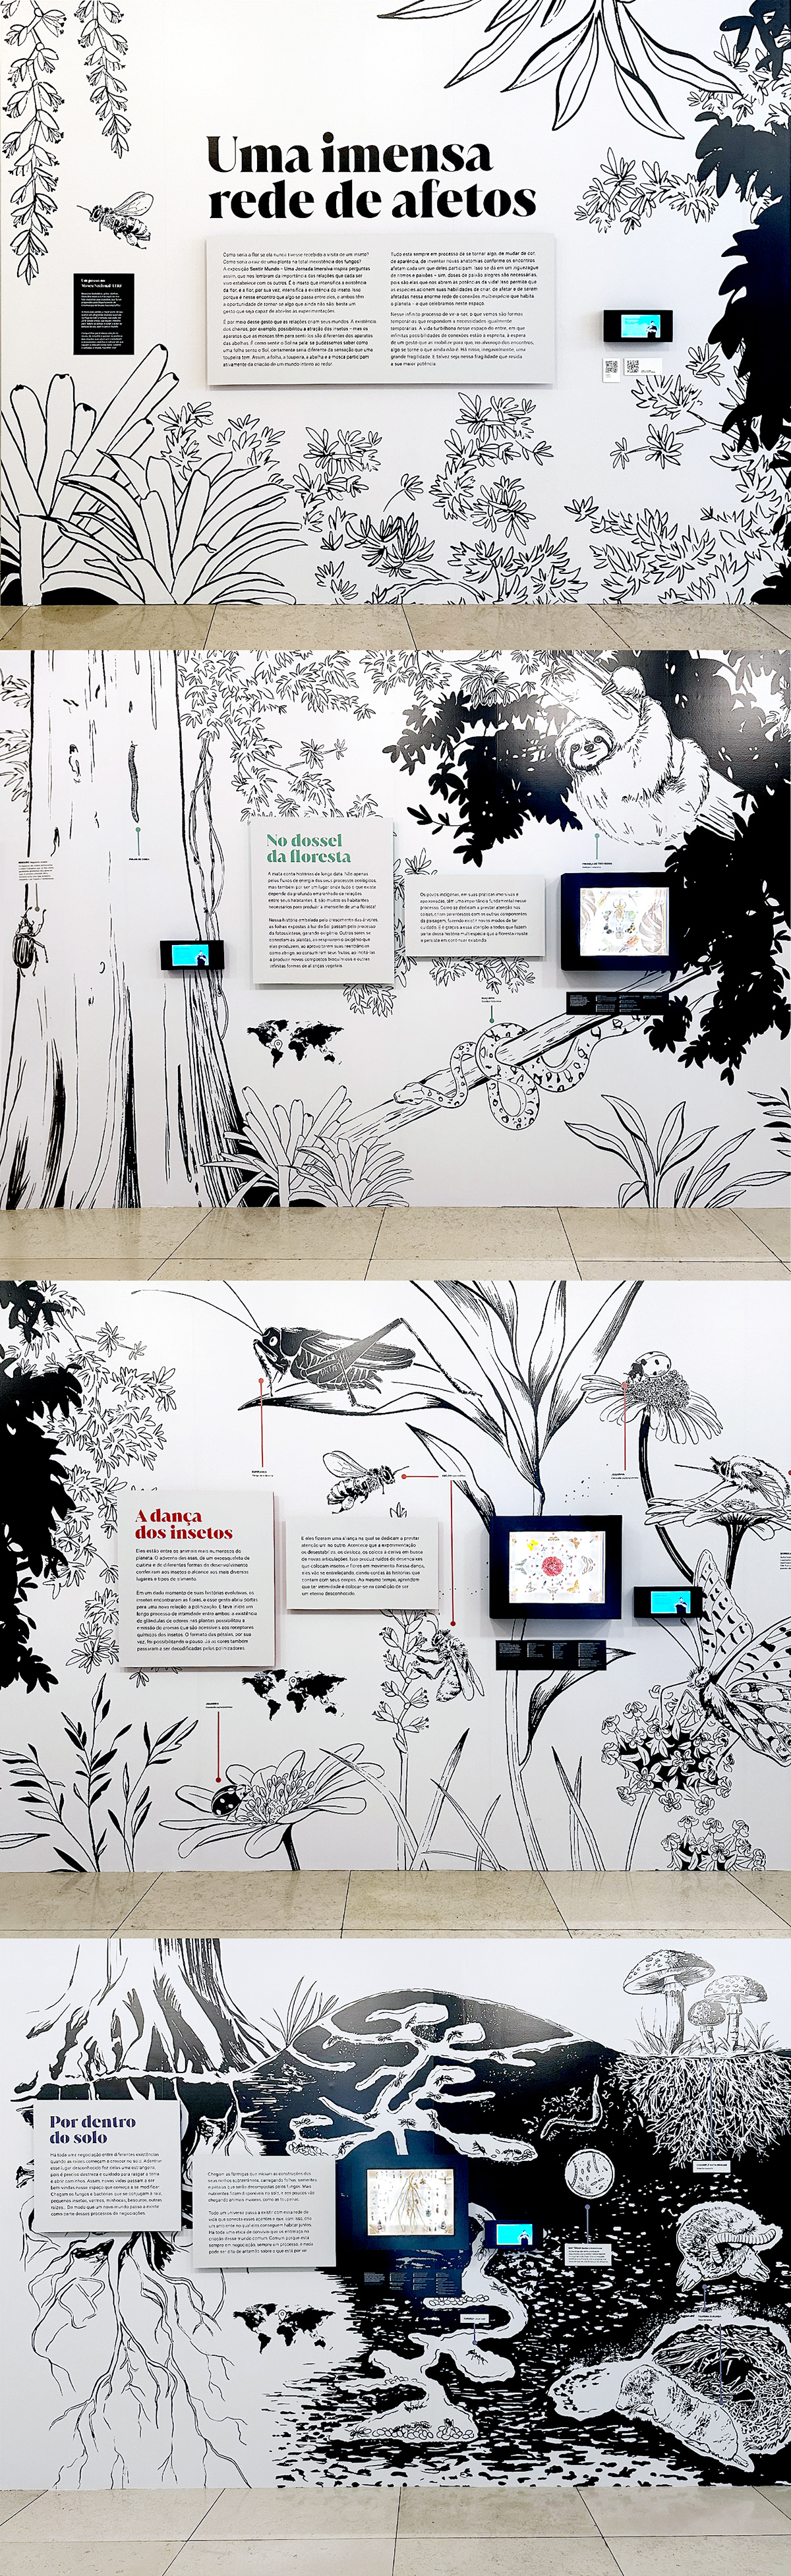 Vectorillustration insect Nature animals forest Flowers bee museu do amanha sensory odyssey wallillustration